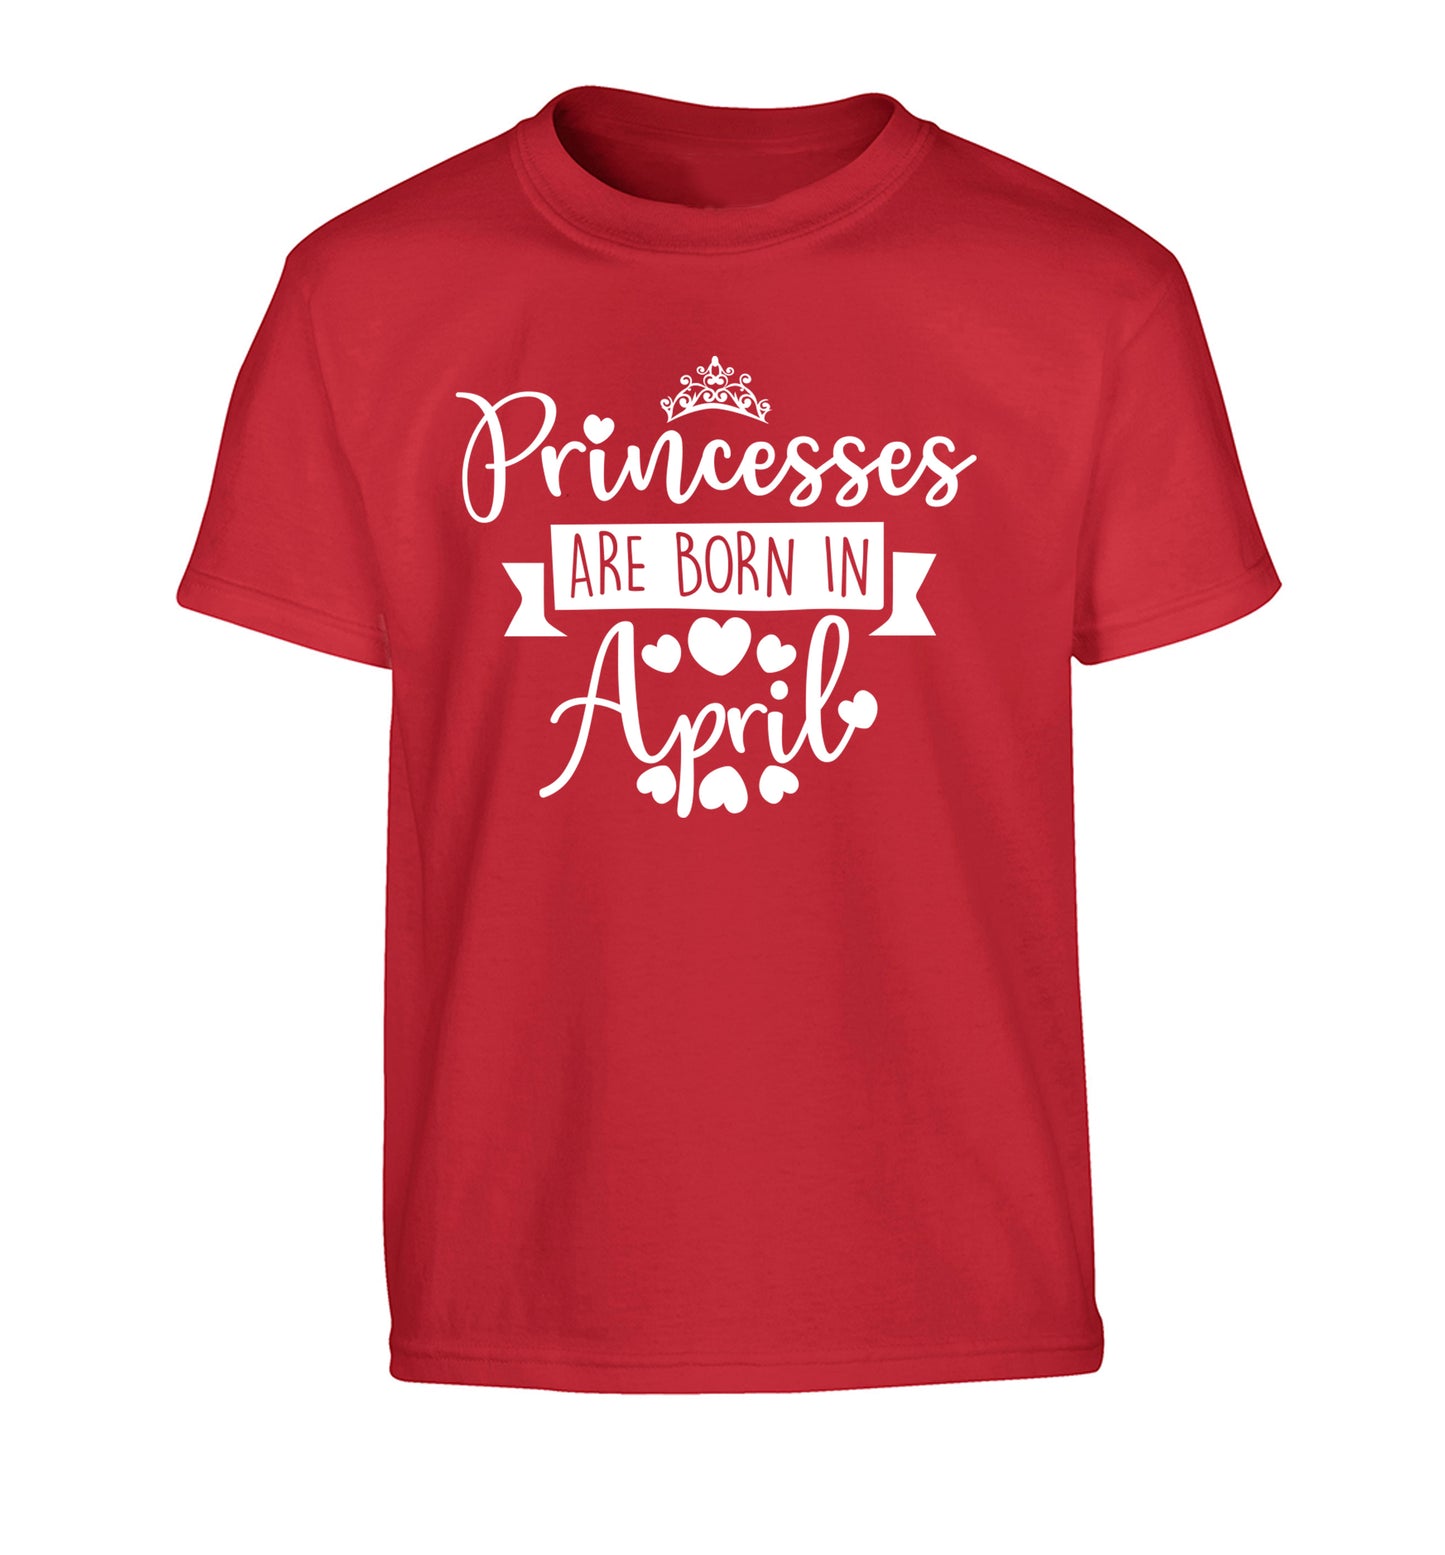 Princesses are born in April Children's red Tshirt 12-13 Years